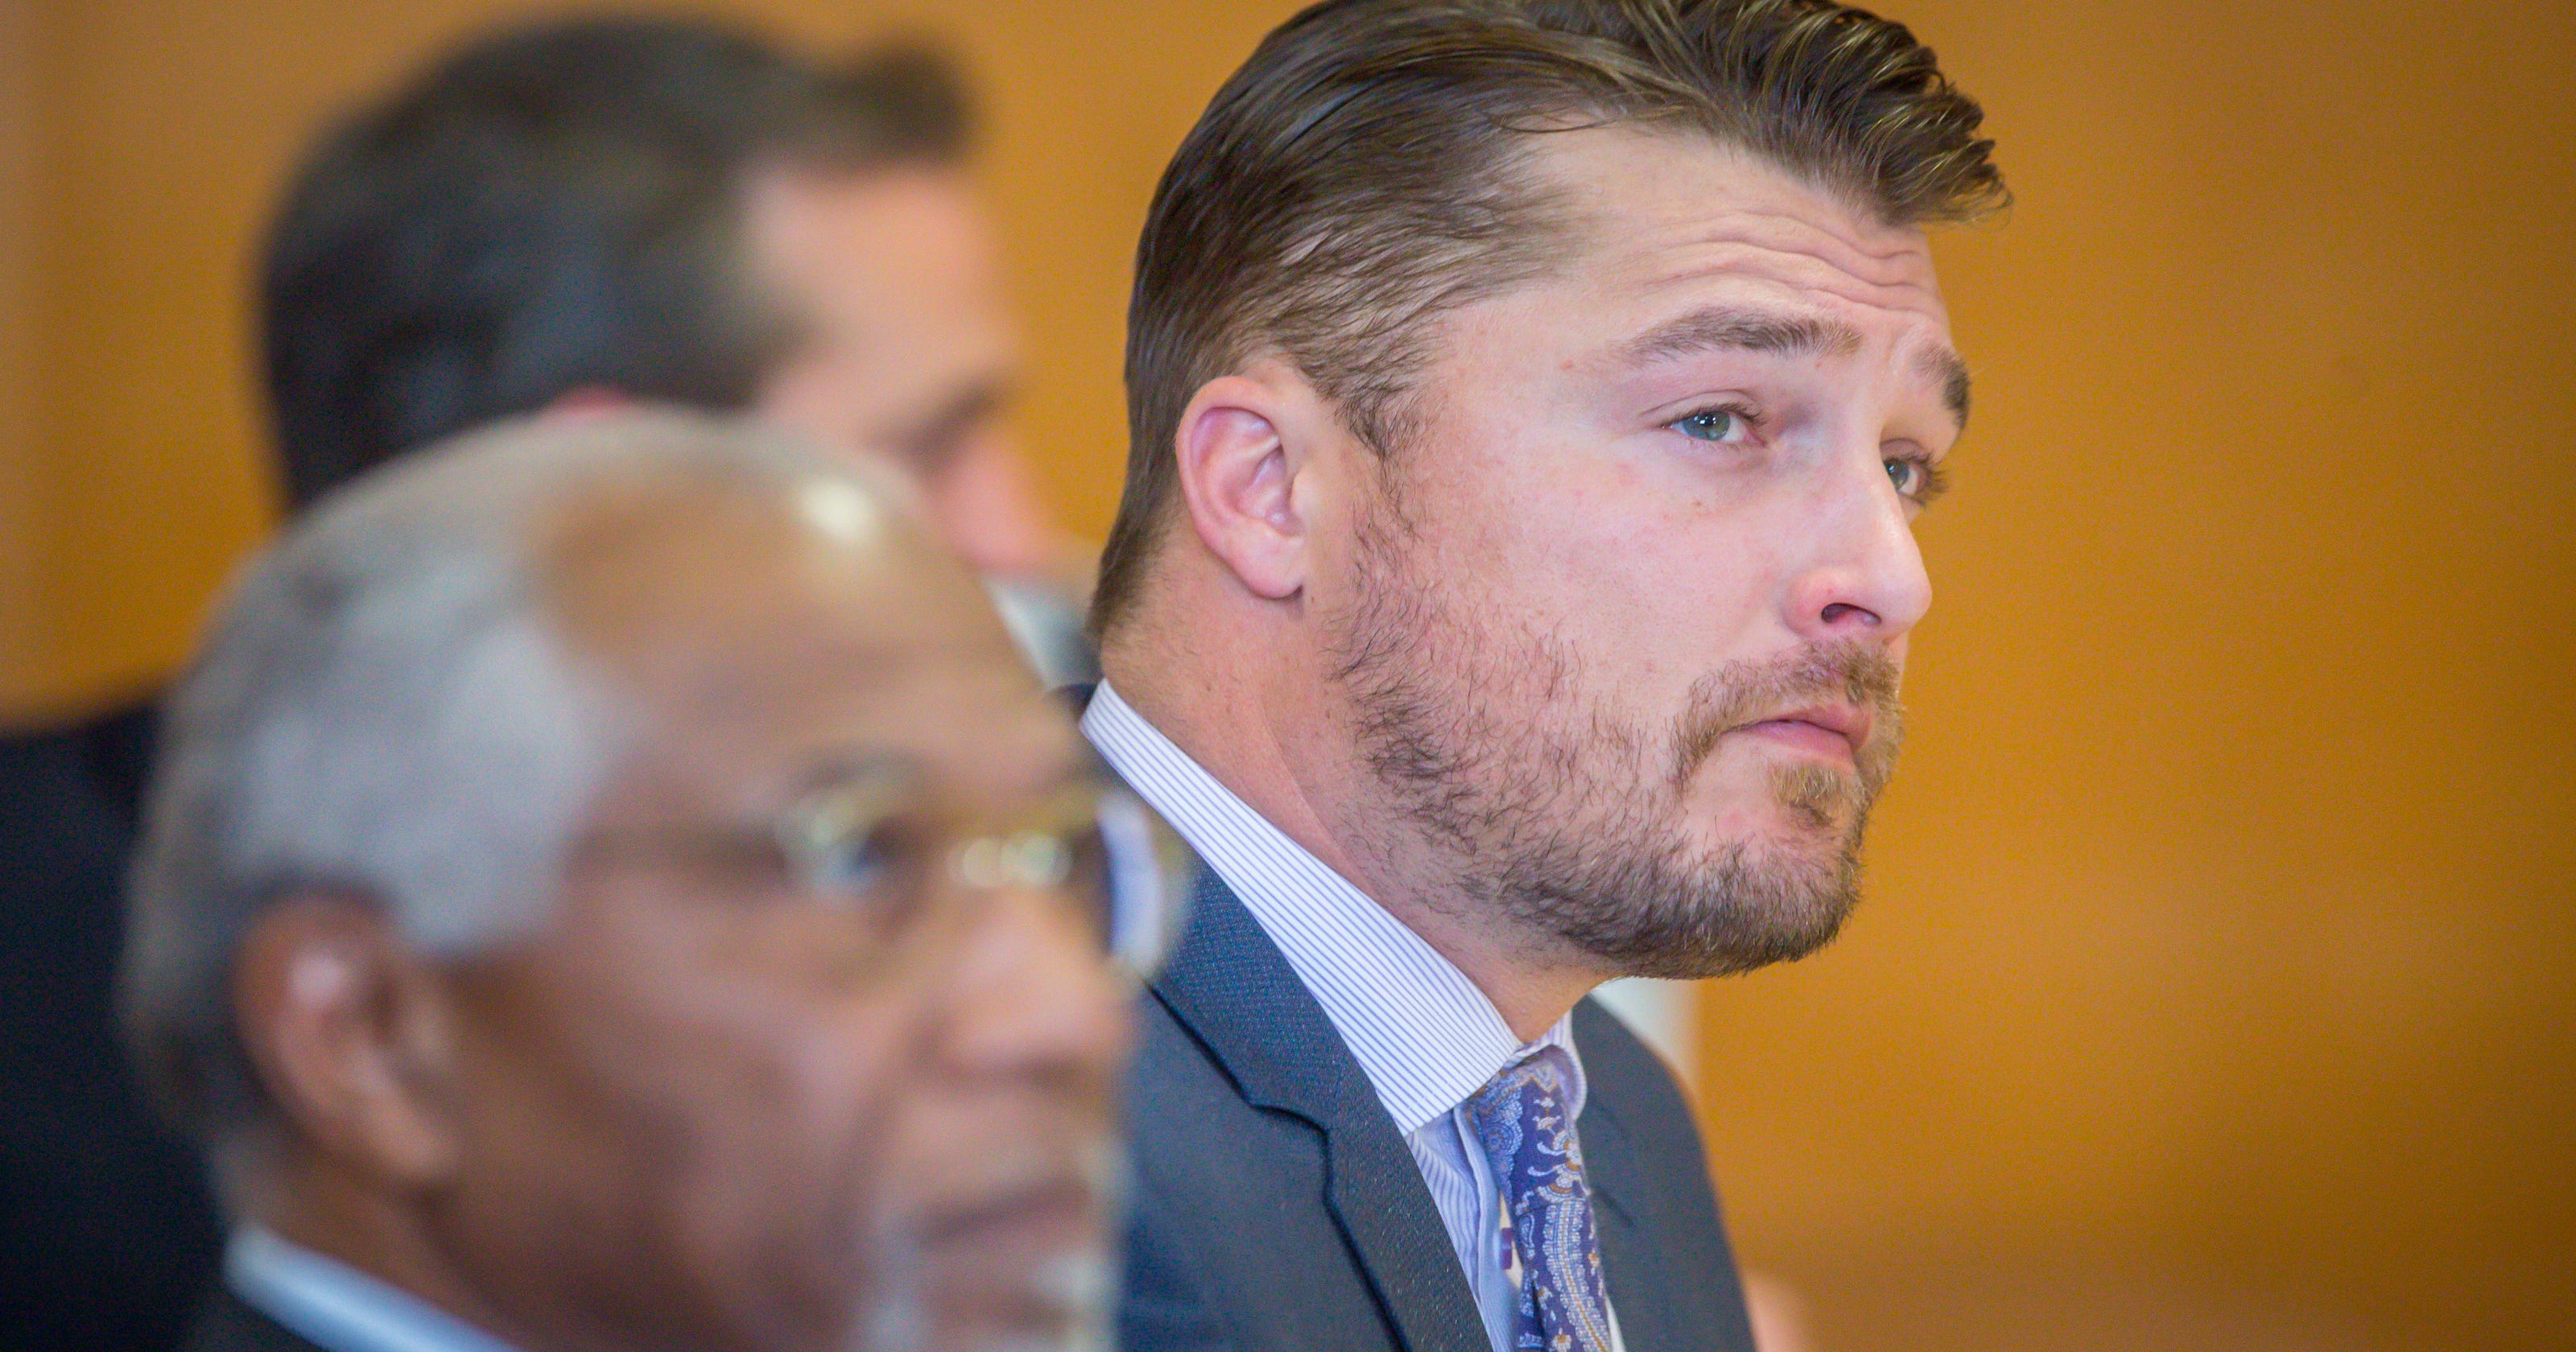 Bachelor Chris Soules Pleads Guilty To Aggravated Misdemeanor